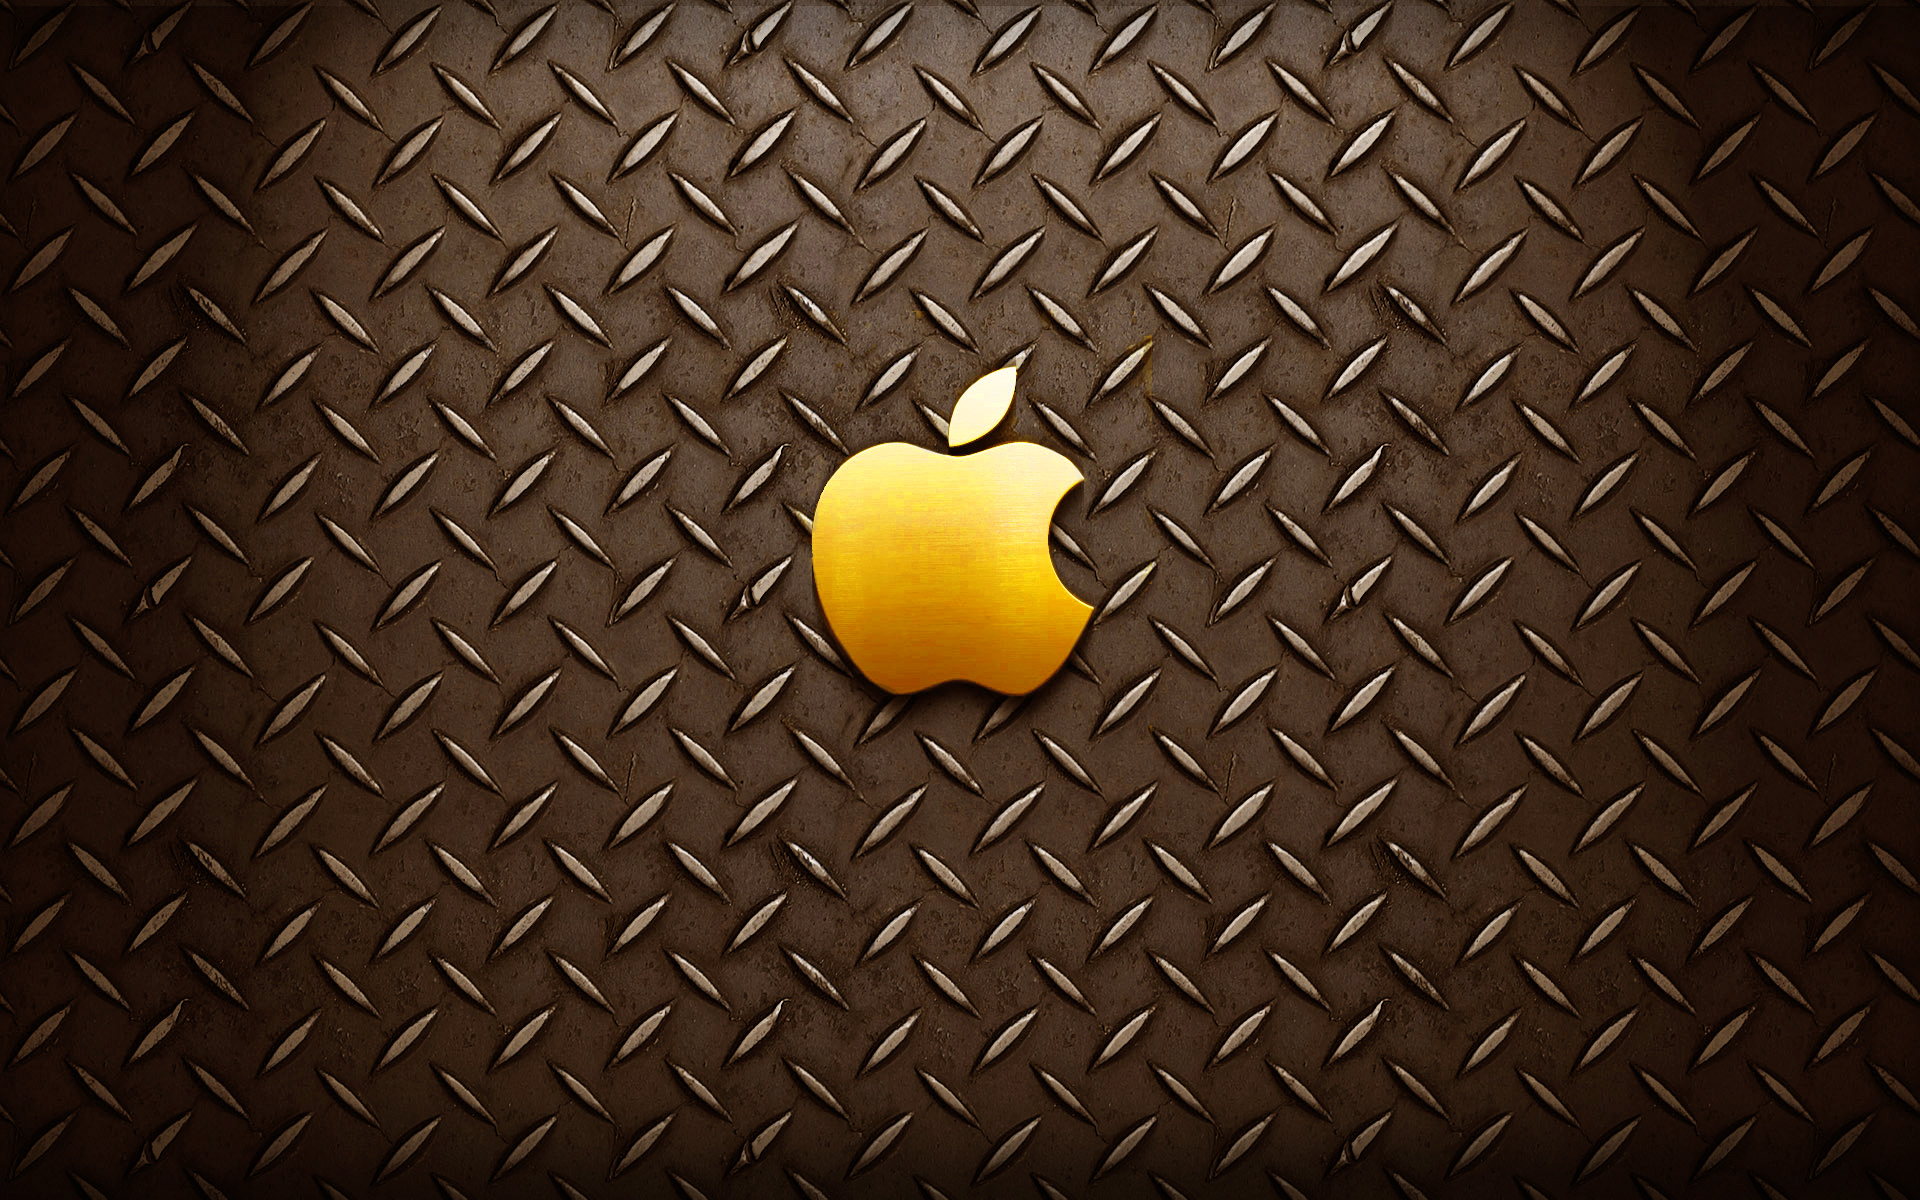 Wallpaper Albums Stores Photo Gold Industrial Apple